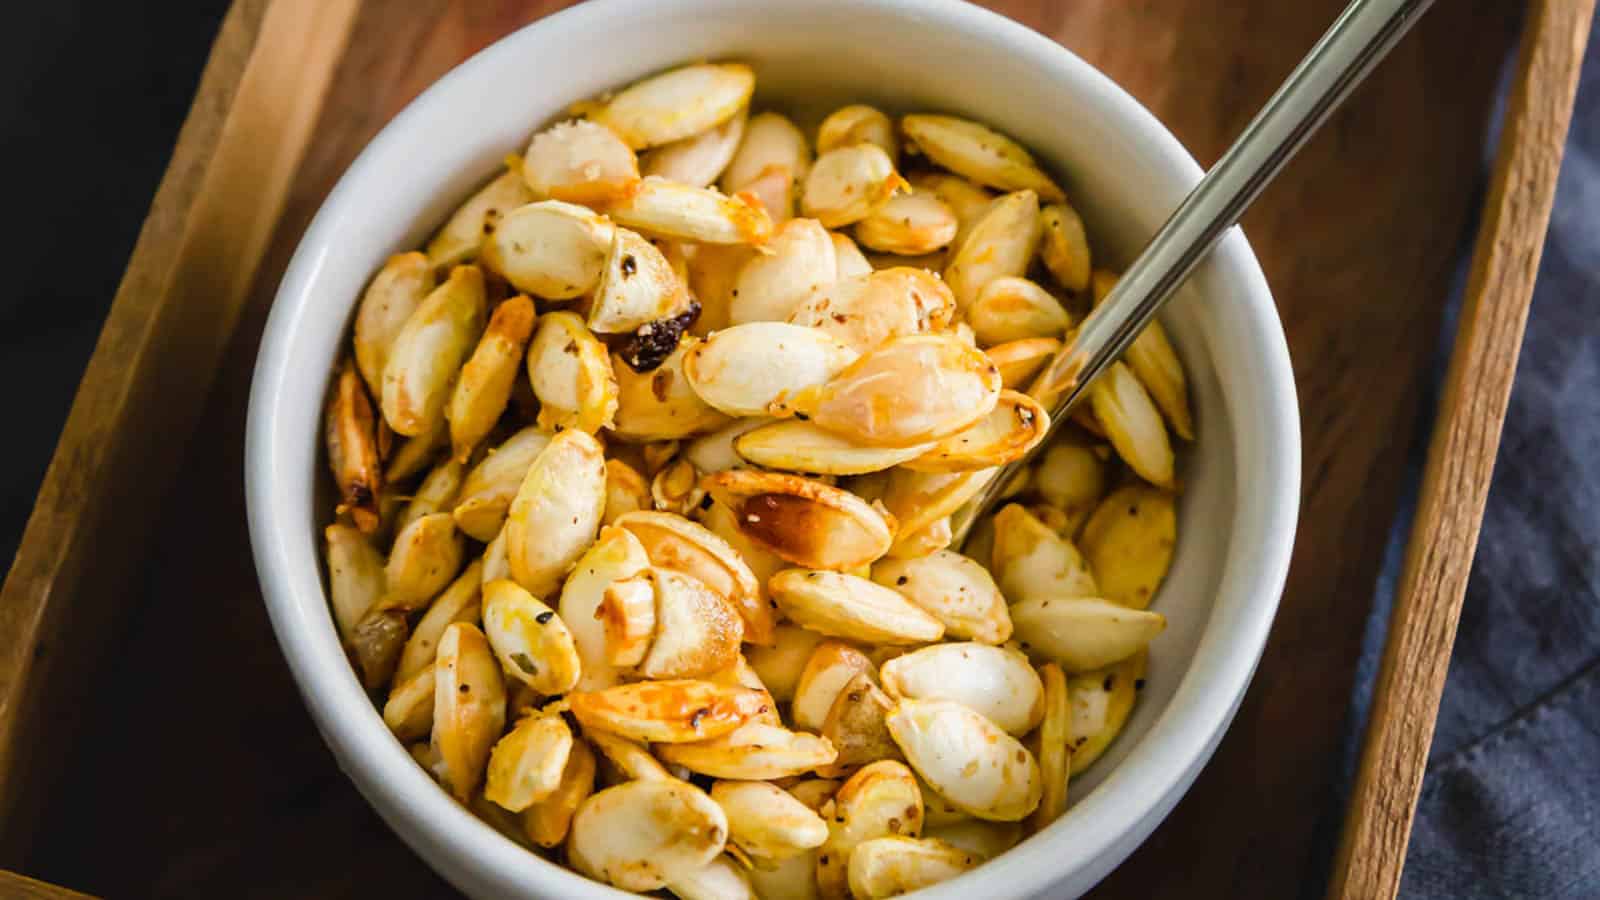 Roasted squash seeds in a white bowl with a spoon.